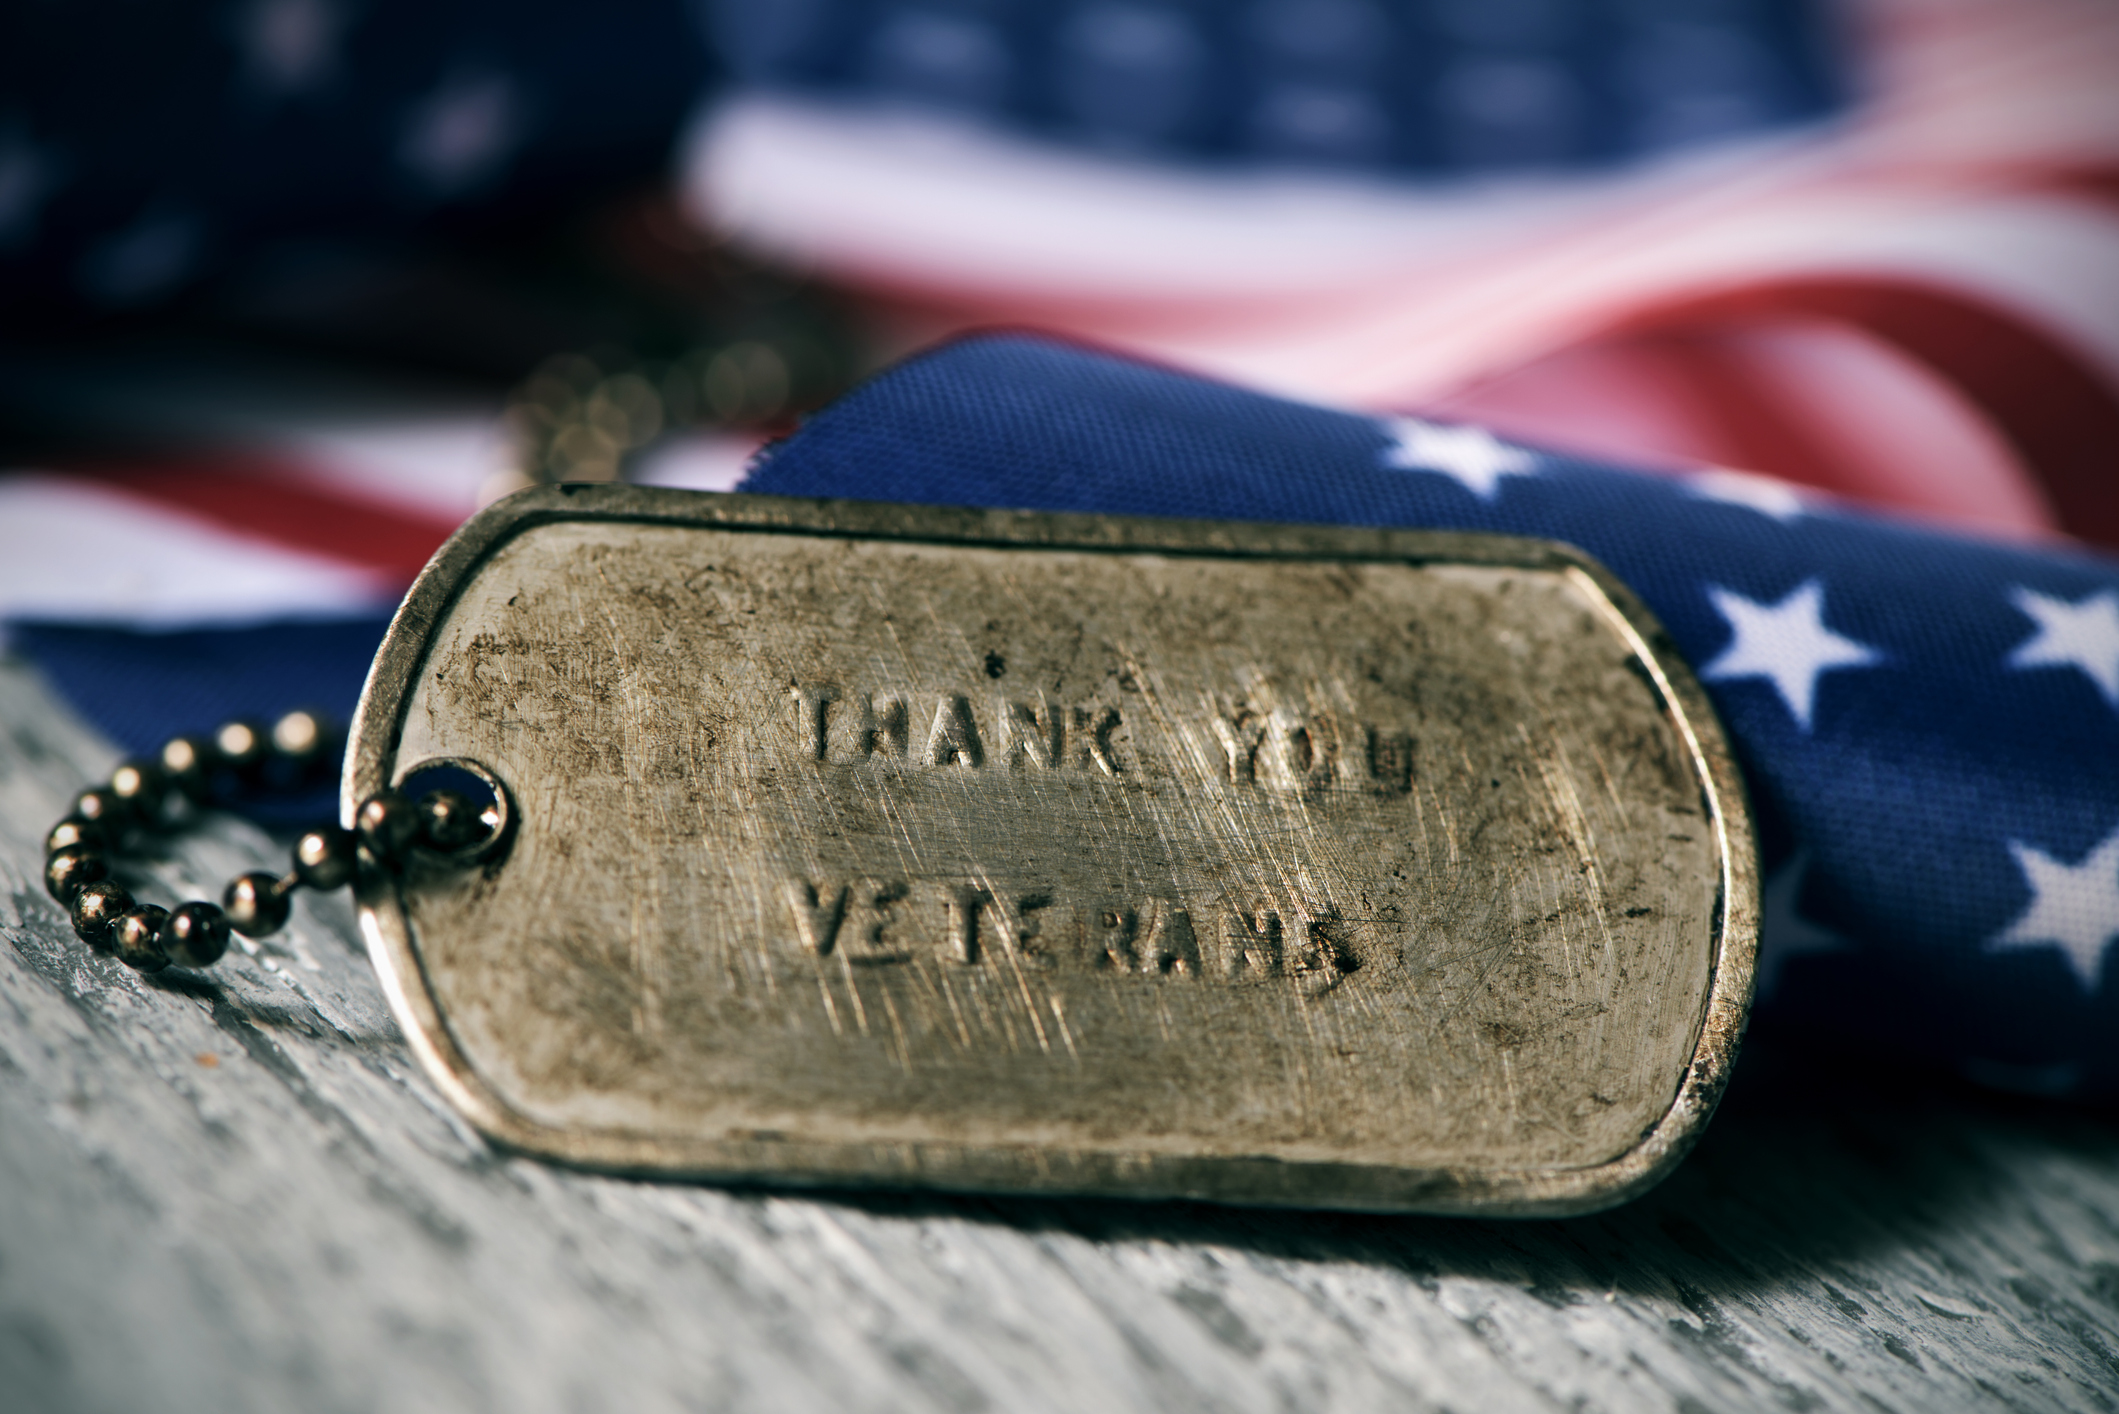 closeup of a rusty dog tag with the text thank you veterans engraved in it, next to a flag of the United States, on a rustic wooden surface